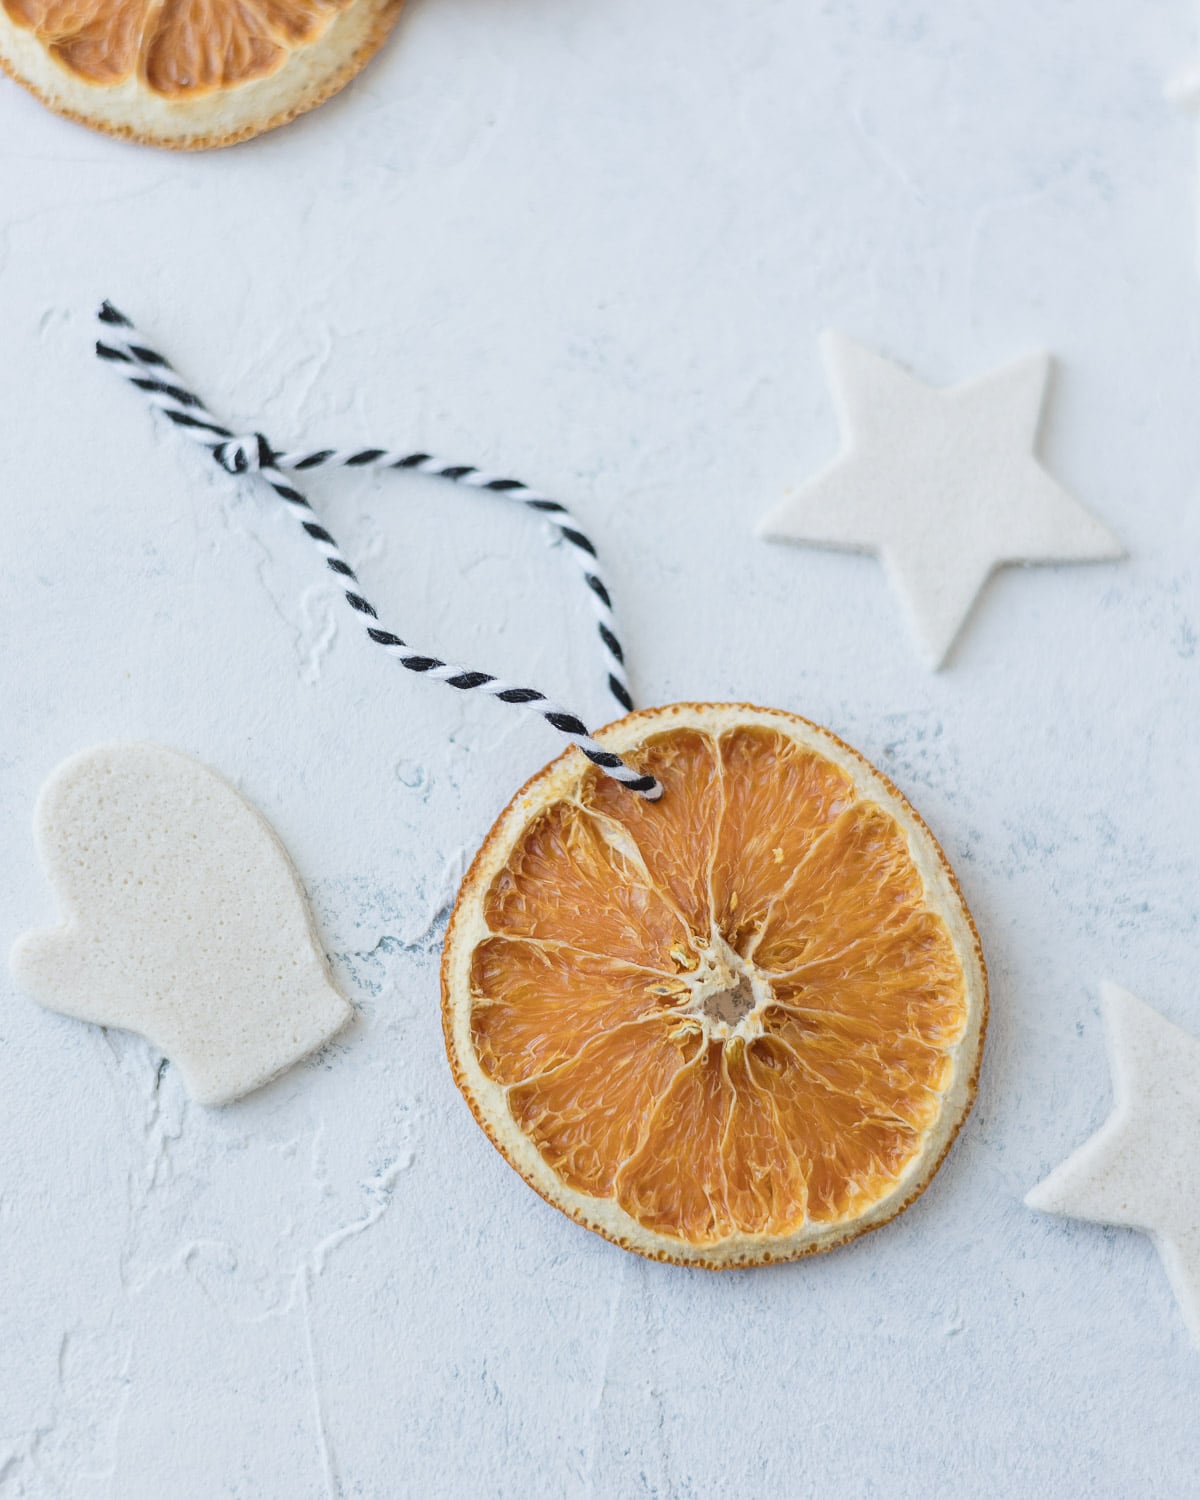 An orange slice ornament with a black-and-white string hanger.